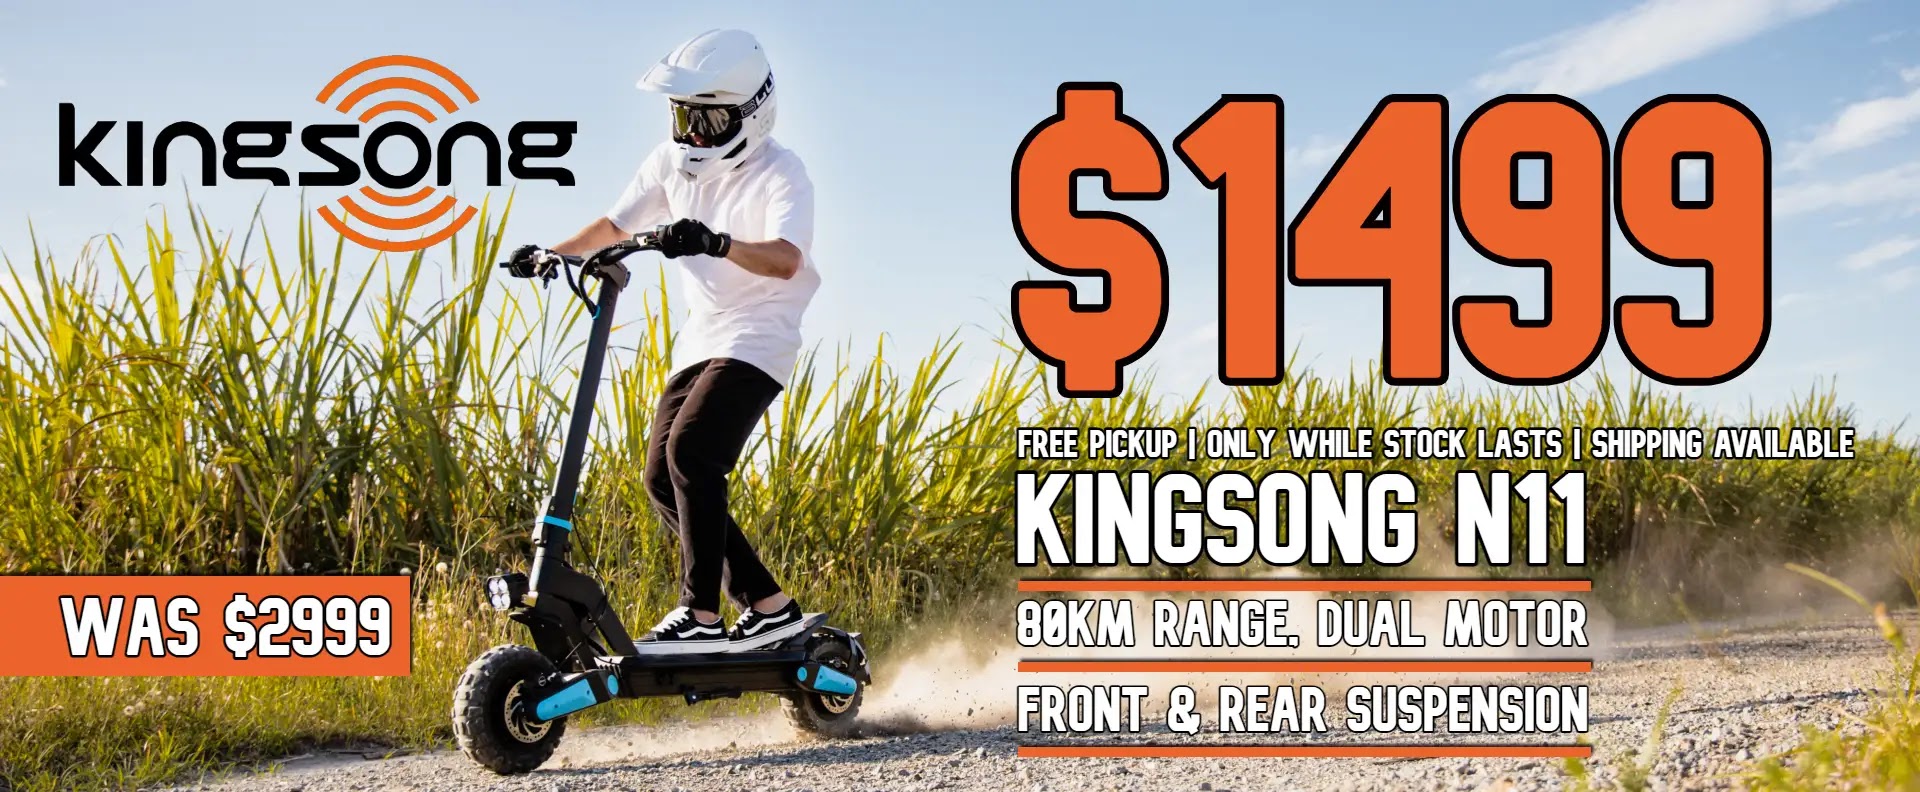 KingSong N11 Electric Scooter Banner final version